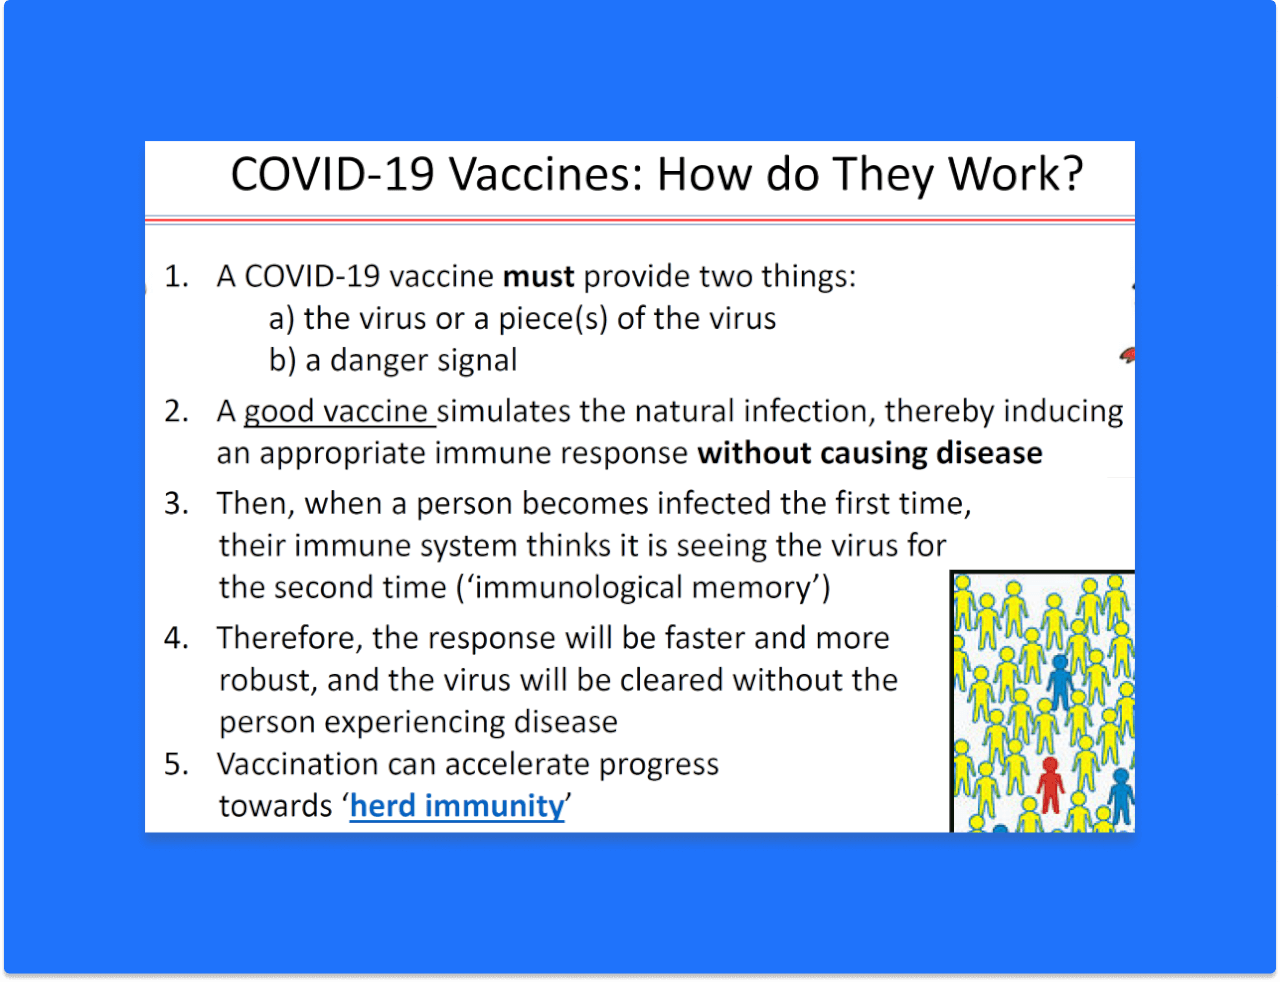 COVID-19 Vaccines: How do They Work?